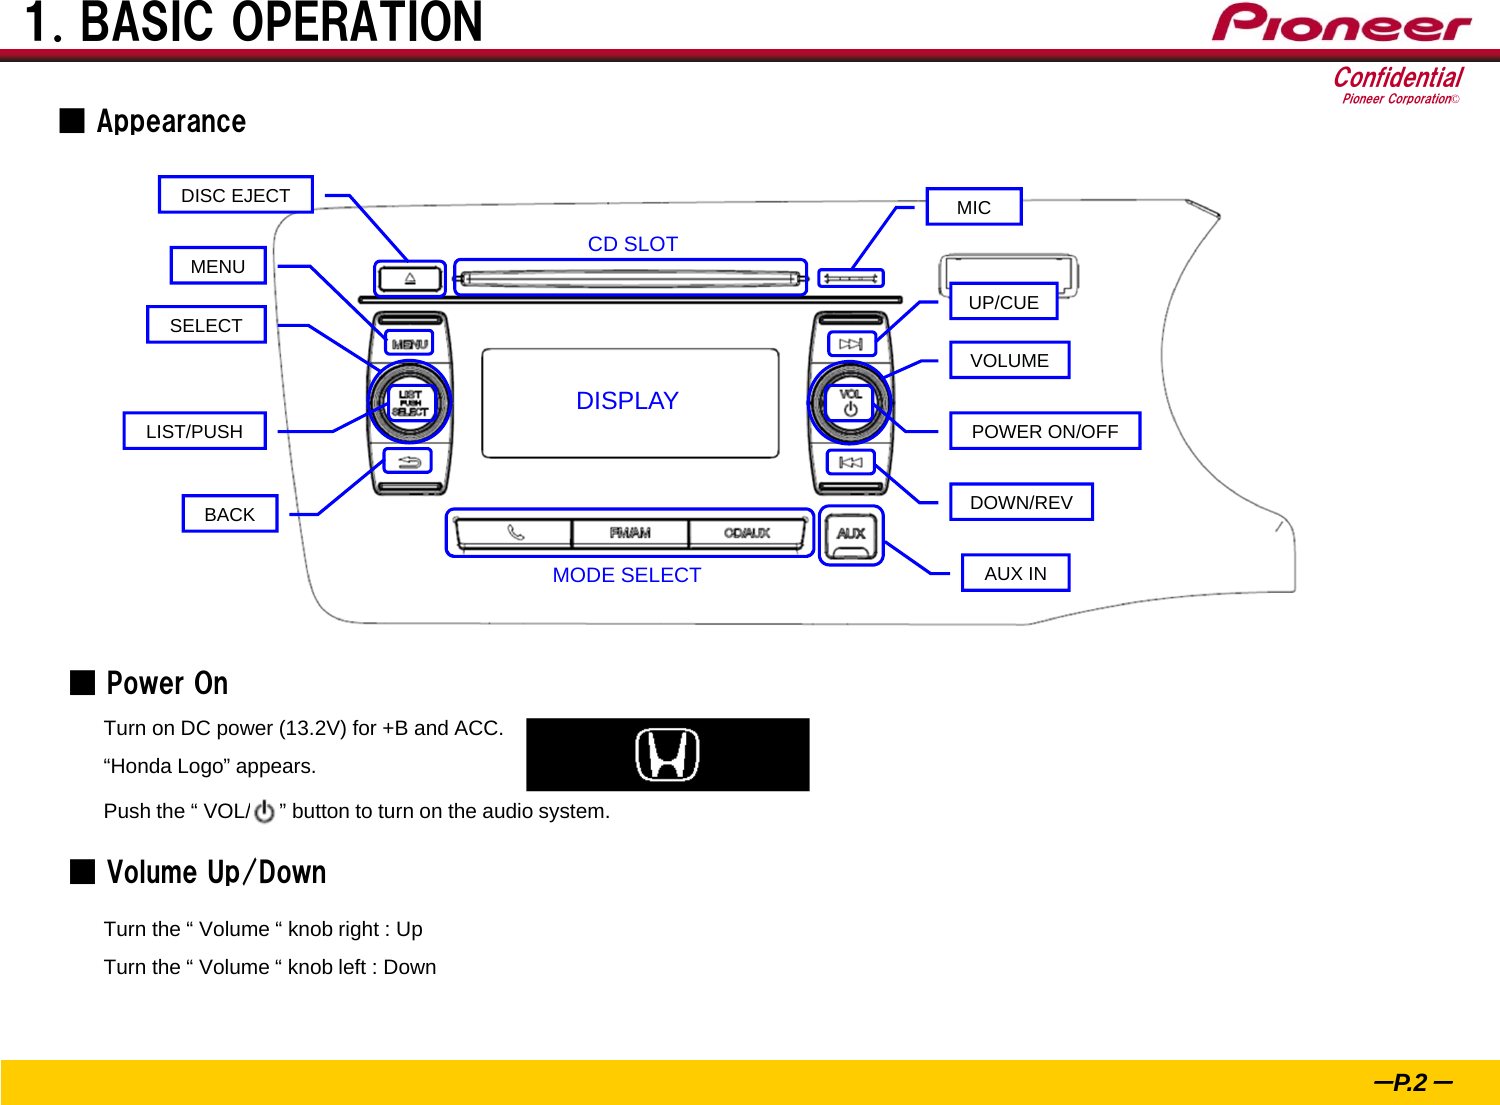 ConfidentialPioneer Corporation©Push the “ VOL/     ” button to turn on the audio system. 21. BASIC OPERATION－P.2－■ AppearanceTurn on DC power (13.2V) for +B and ACC. “Honda Logo” appears.DISC EJECTMENUBACKSELECTLIST/PUSHUP/CUEDOWN/REVVOLUMEPOWER ON/OFFMODE SELECT AUX INDISPLAYCD SLOTMIC■ Power On■ Volume Up/DownTurn the “ Volume “ knob right : UpTurn the “ Volume “ knob left : Down